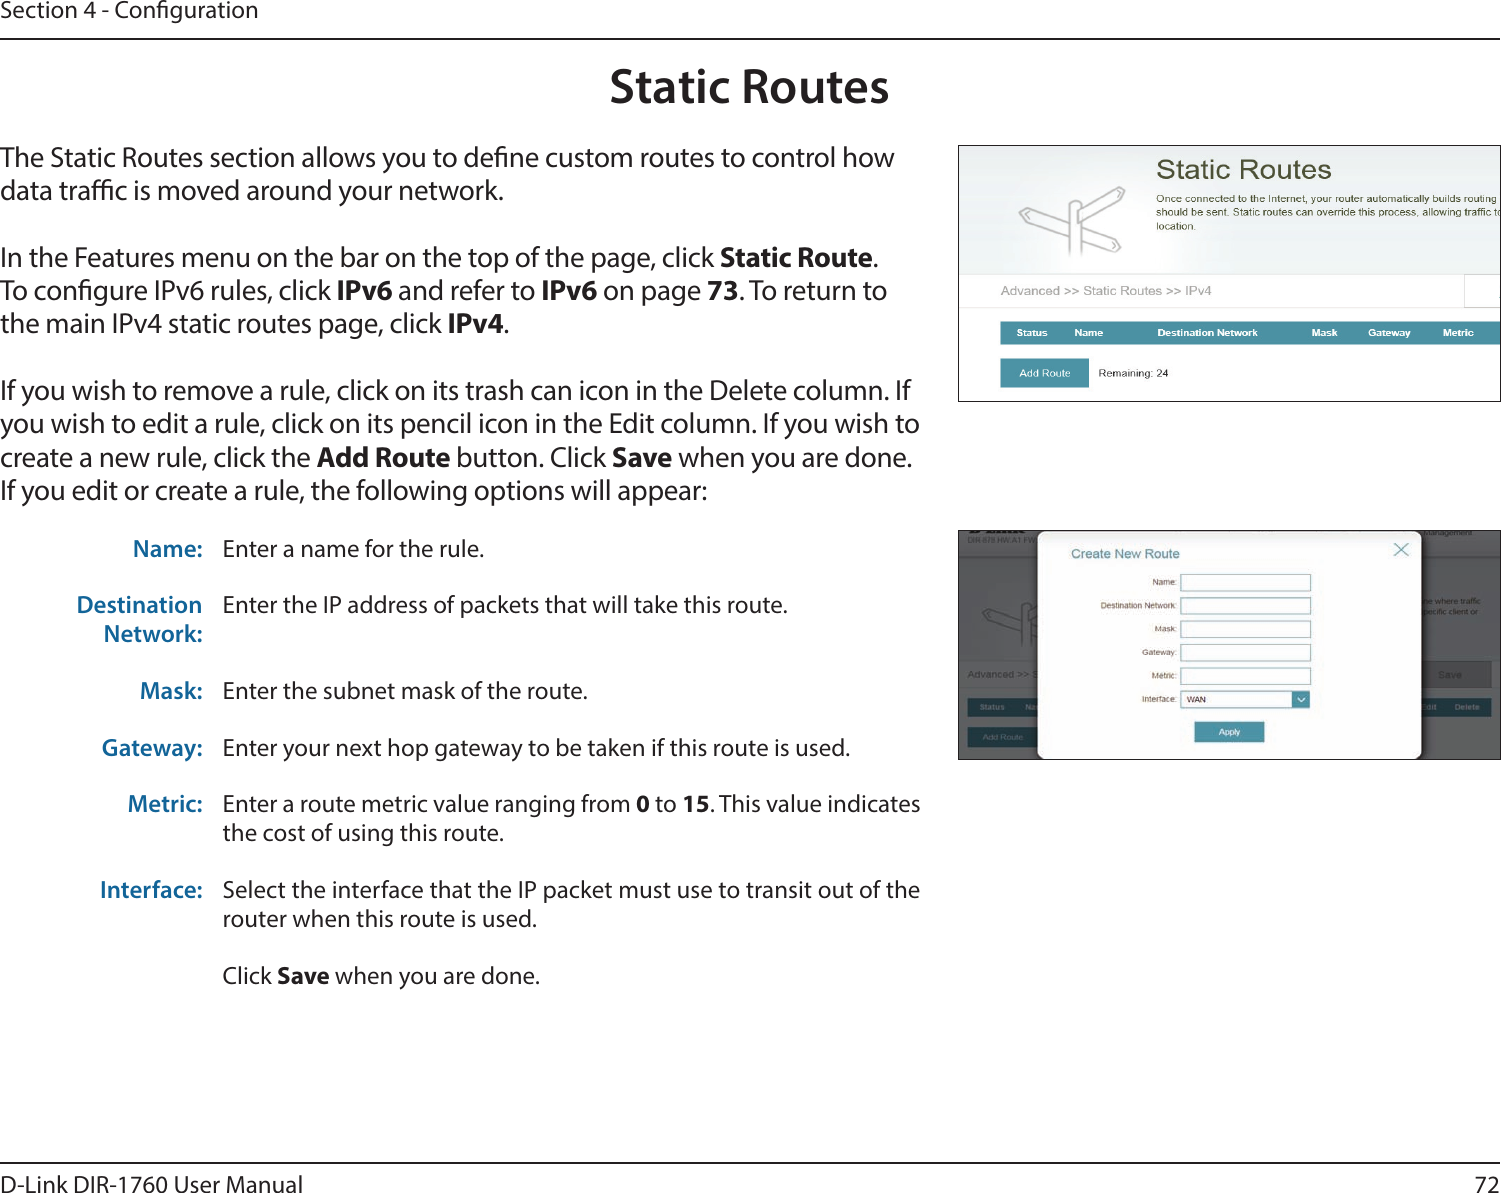 72D-Link DIR-1760 User ManualSection 4 - CongurationStatic RoutesThe Static Routes section allows you to dene custom routes to control how data trac is moved around your network.In the Features menu on the bar on the top of the page, click Static Route.To congure IPv6 rules, click IPv6 and refer to IPv6 on page 73. To return to the main IPv4 static routes page, click IPv4.If you wish to remove a rule, click on its trash can icon in the Delete column. If you wish to edit a rule, click on its pencil icon in the Edit column. If you wish to create a new rule, click the Add Route button. Click Save when you are done. If you edit or create a rule, the following options will appear:Name: Enter a name for the rule.Destination Network:Enter the IP address of packets that will take this route.Mask: Enter the subnet mask of the route.Gateway: Enter your next hop gateway to be taken if this route is used.Metric: Enter a route metric value ranging from 0 to 15. This value indicates the cost of using this route. Interface: Select the interface that the IP packet must use to transit out of the router when this route is used. Click Save when you are done.